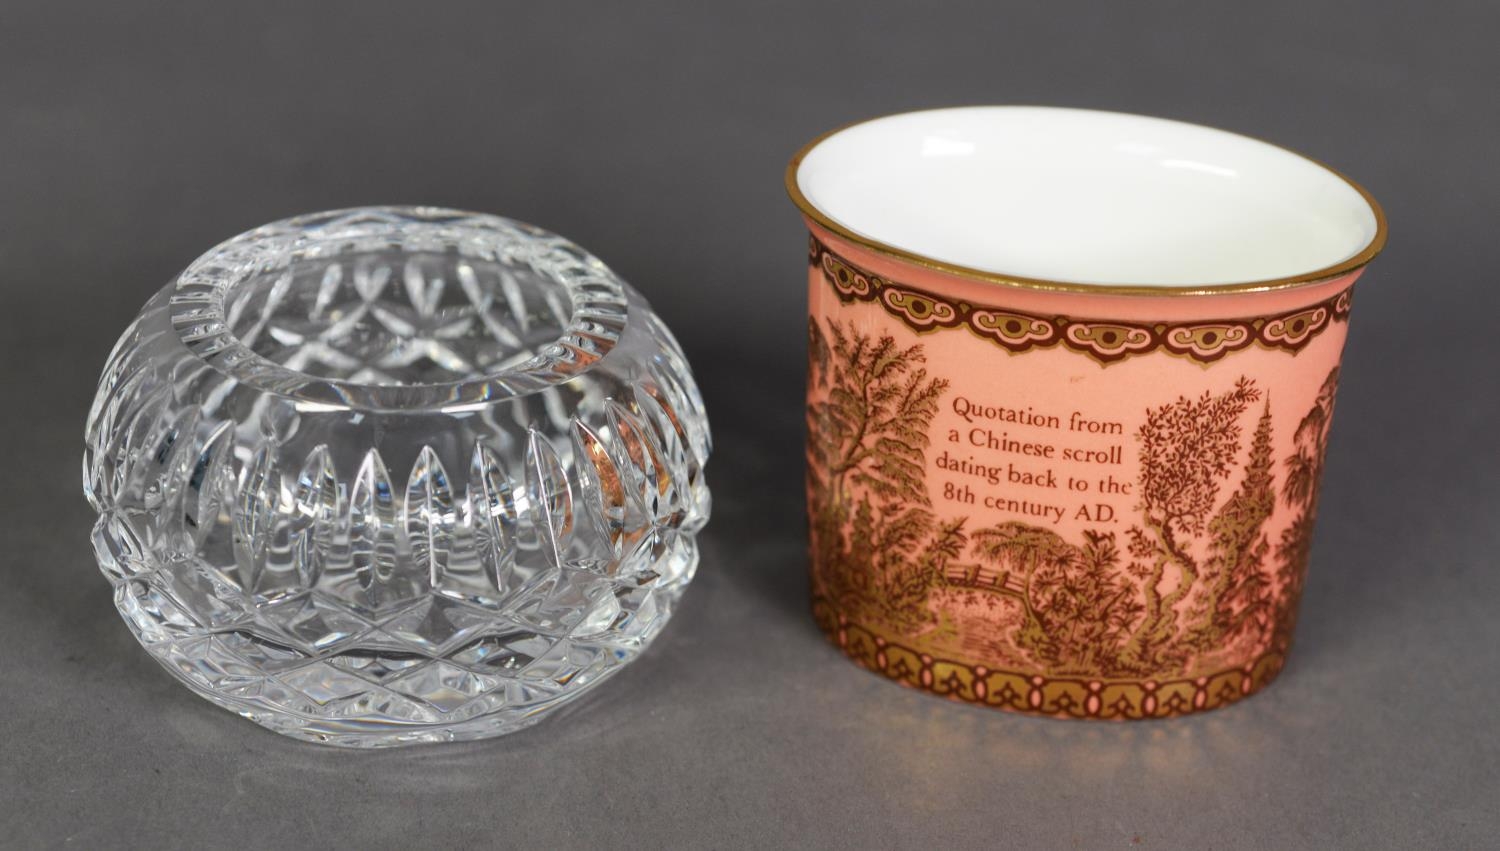 HALCYON DAYS CHINA OVAL CIGARETTE RECEIVER and a probably Bing & Grondhal CUT GLASS GLOBULAR BOWL, 3